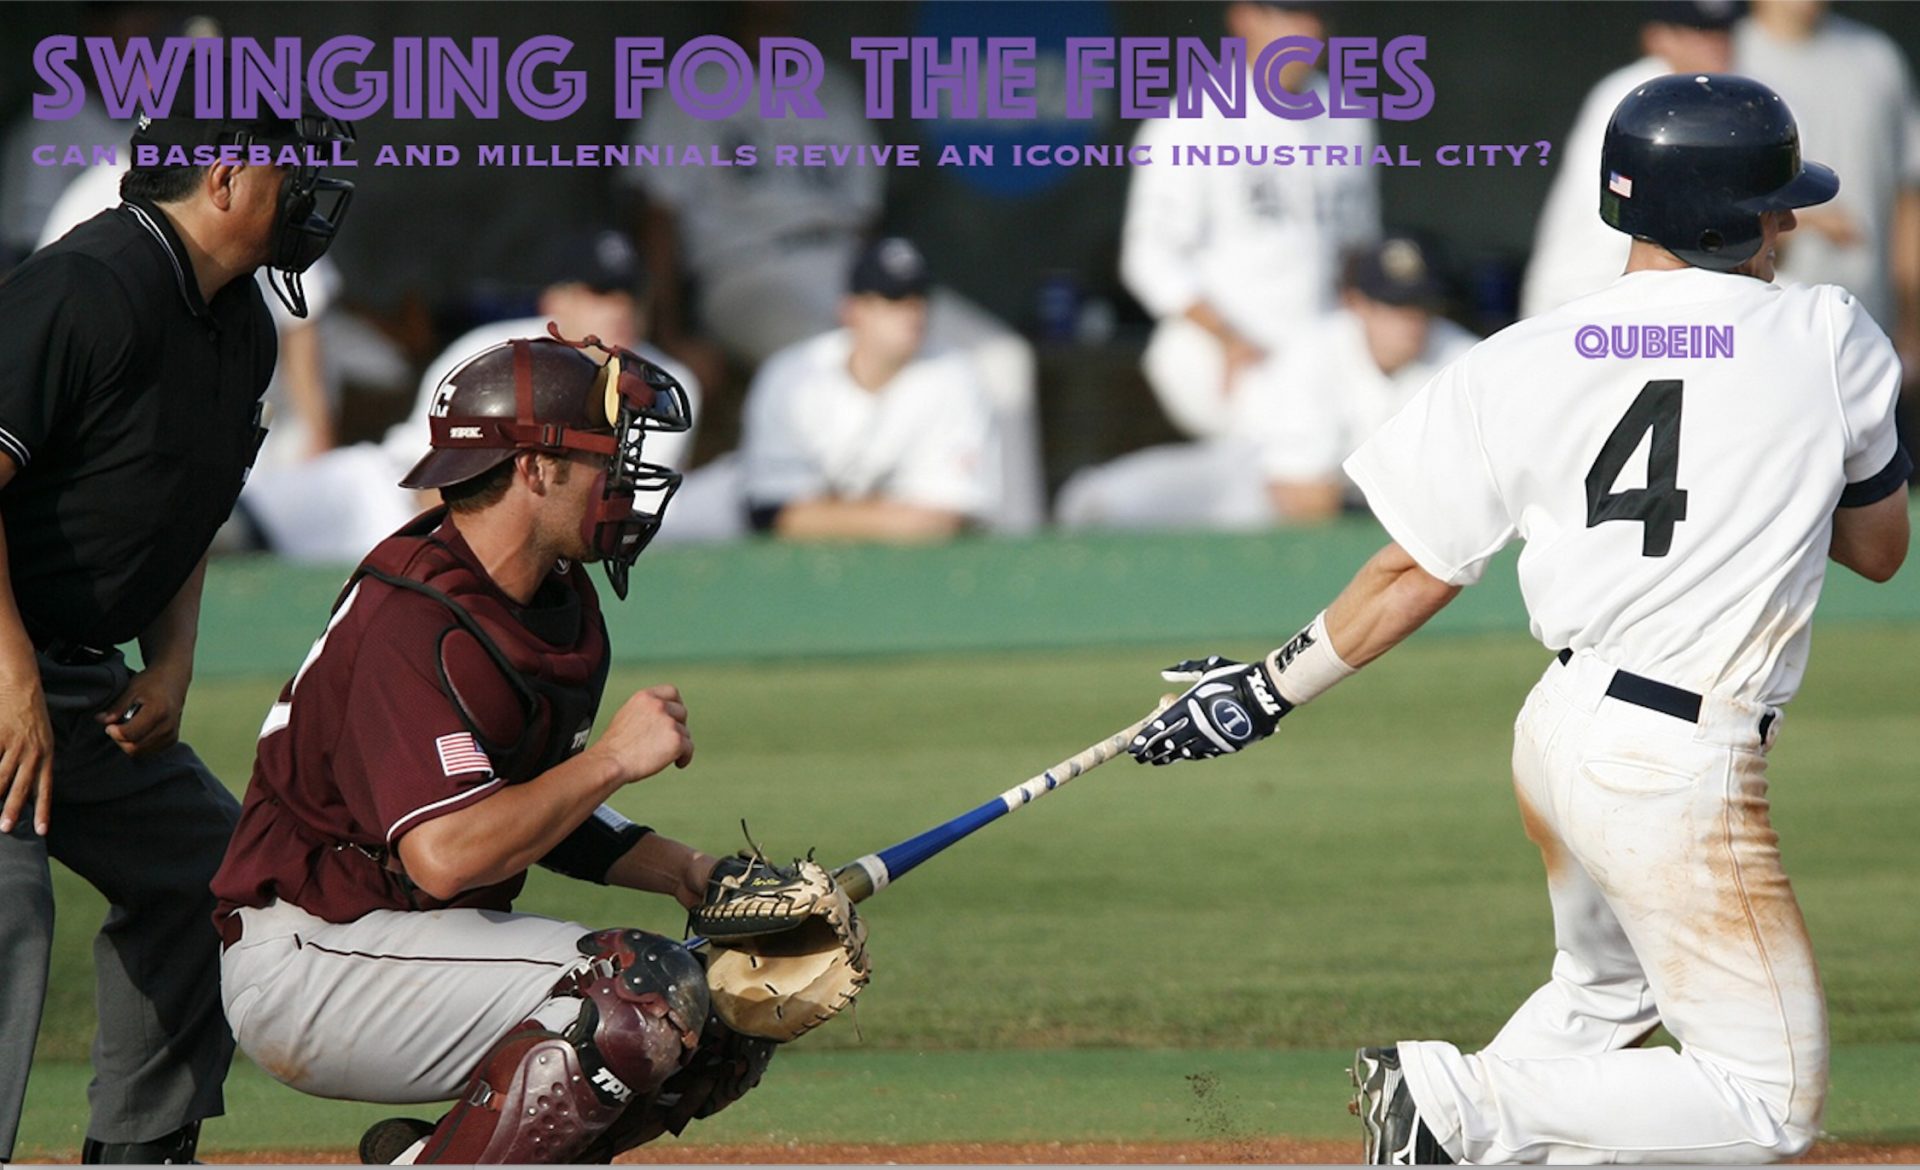 Swinging for the Fences